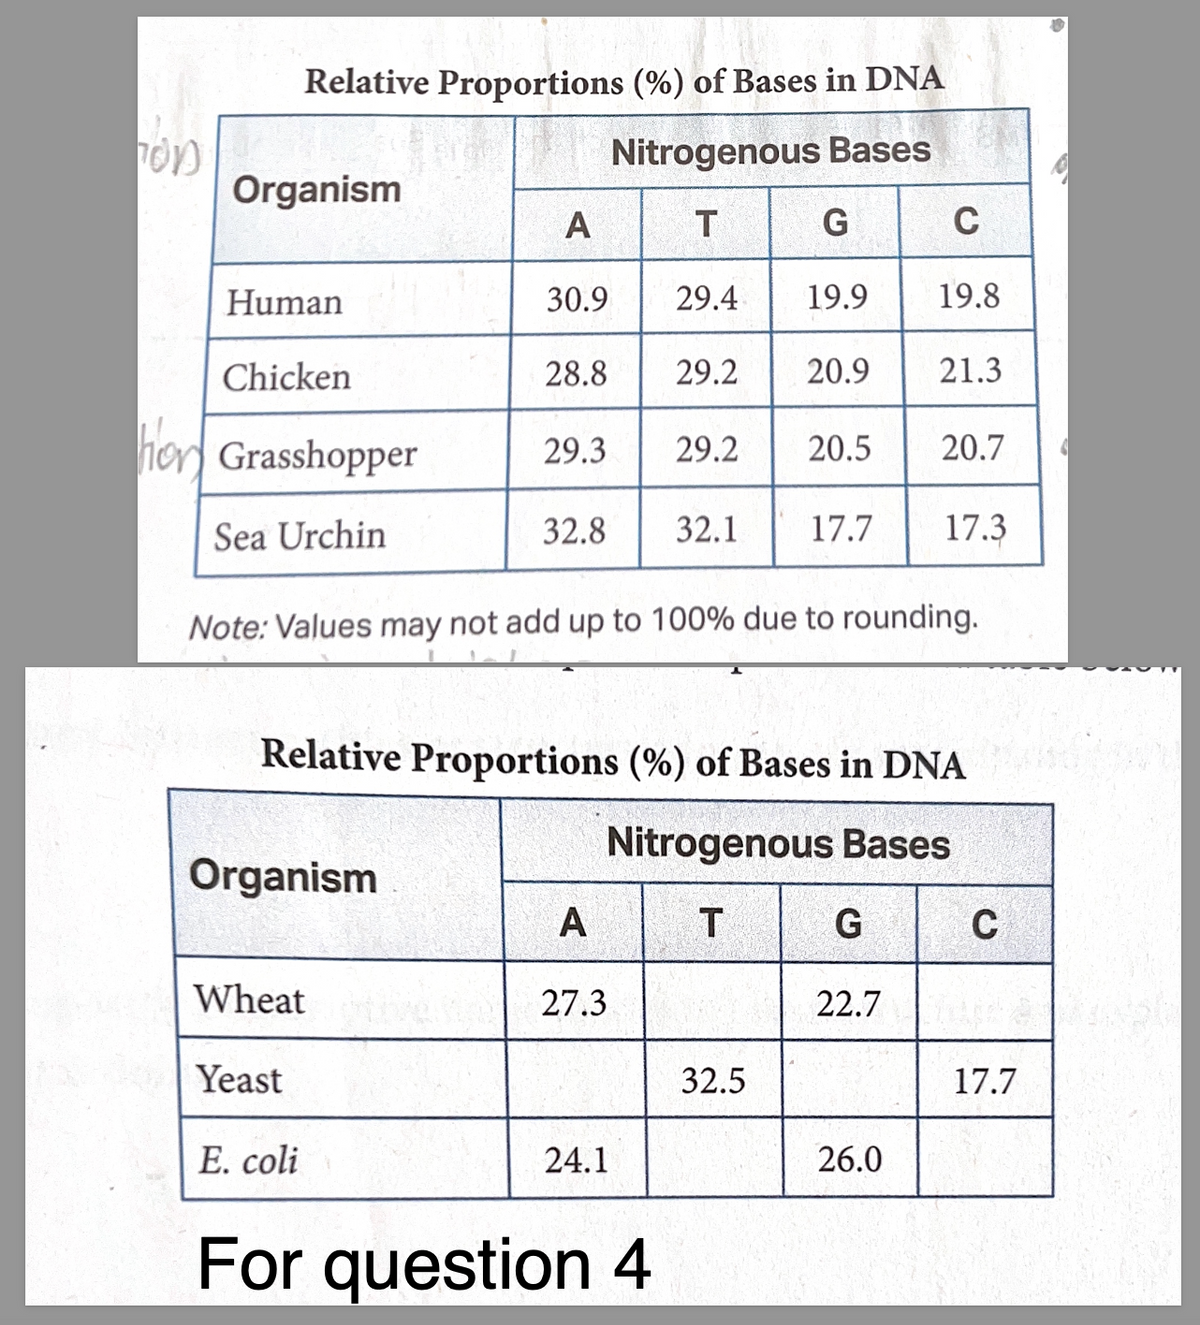 TOD
Relative Proportions (%) of Bases in DNA
Nitrogenous Bases
Organism
A
T
G
C
Human
30.9
29.4
19.9
19.8
Chicken
28.8
29.2
20.9
21.3
hon Grasshopper
29.3
29.2
20.5
20.7
Sea Urchin
32.8
32.1
17.7
17.3
Note: Values may not add up to 100% due to rounding.
Relative Proportions (%) of Bases in DNA
Nitrogenous Bases
Organism
A
T
G
C
Wheat
27.3
22.7
Yeast
32.5
17.7
E. coli
24.1
26.0
For question 4